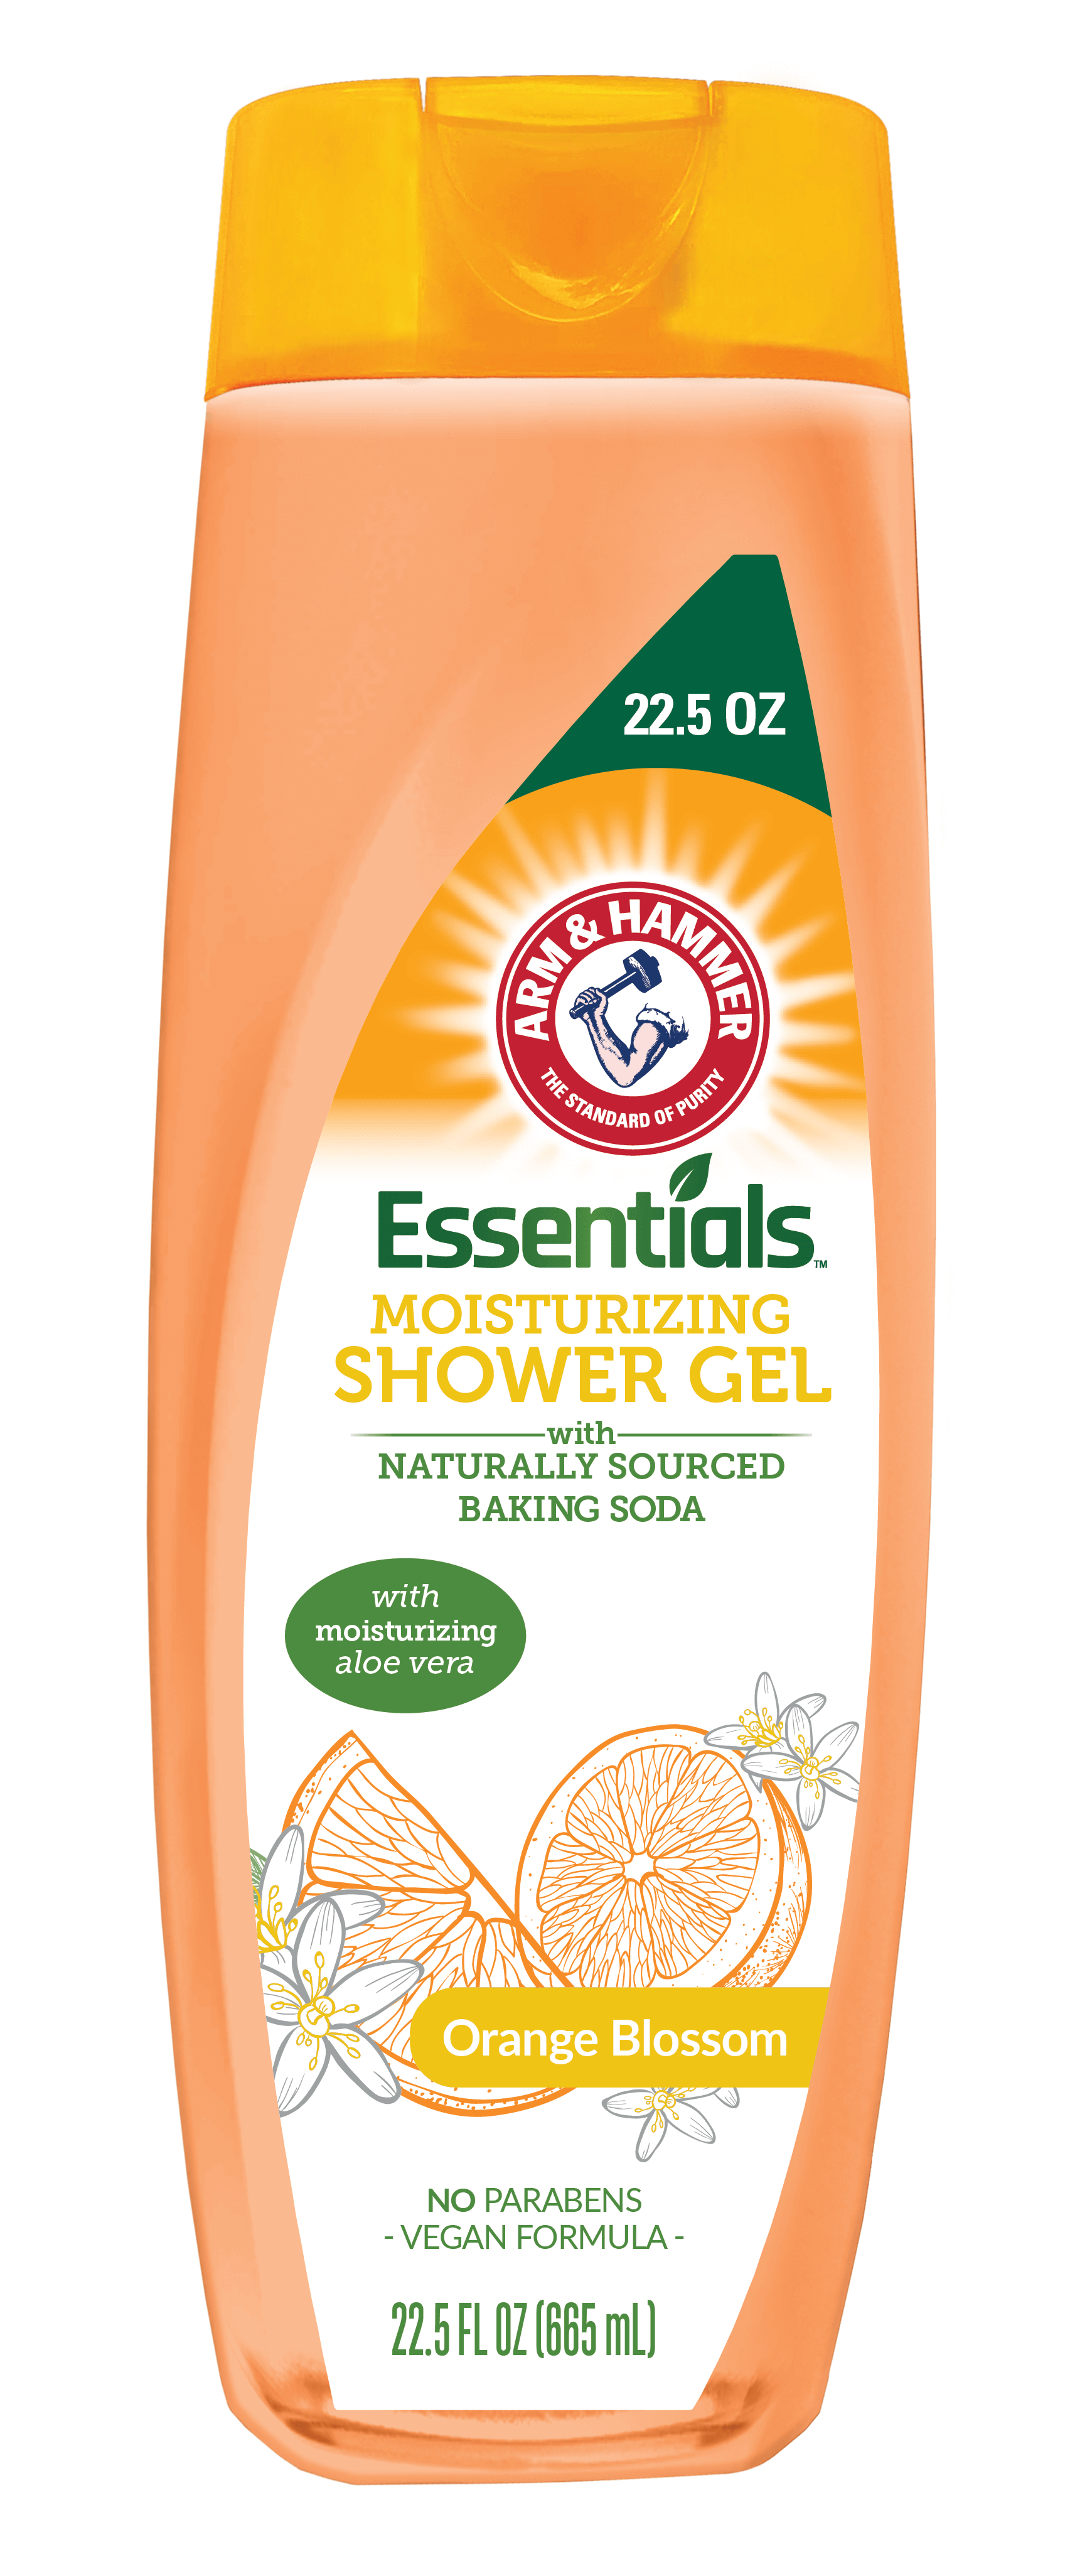 Arm & Hammer 32 Oz. Fresh Scent Clean Shower Daily Shower Cleaner - S.W.  Collins